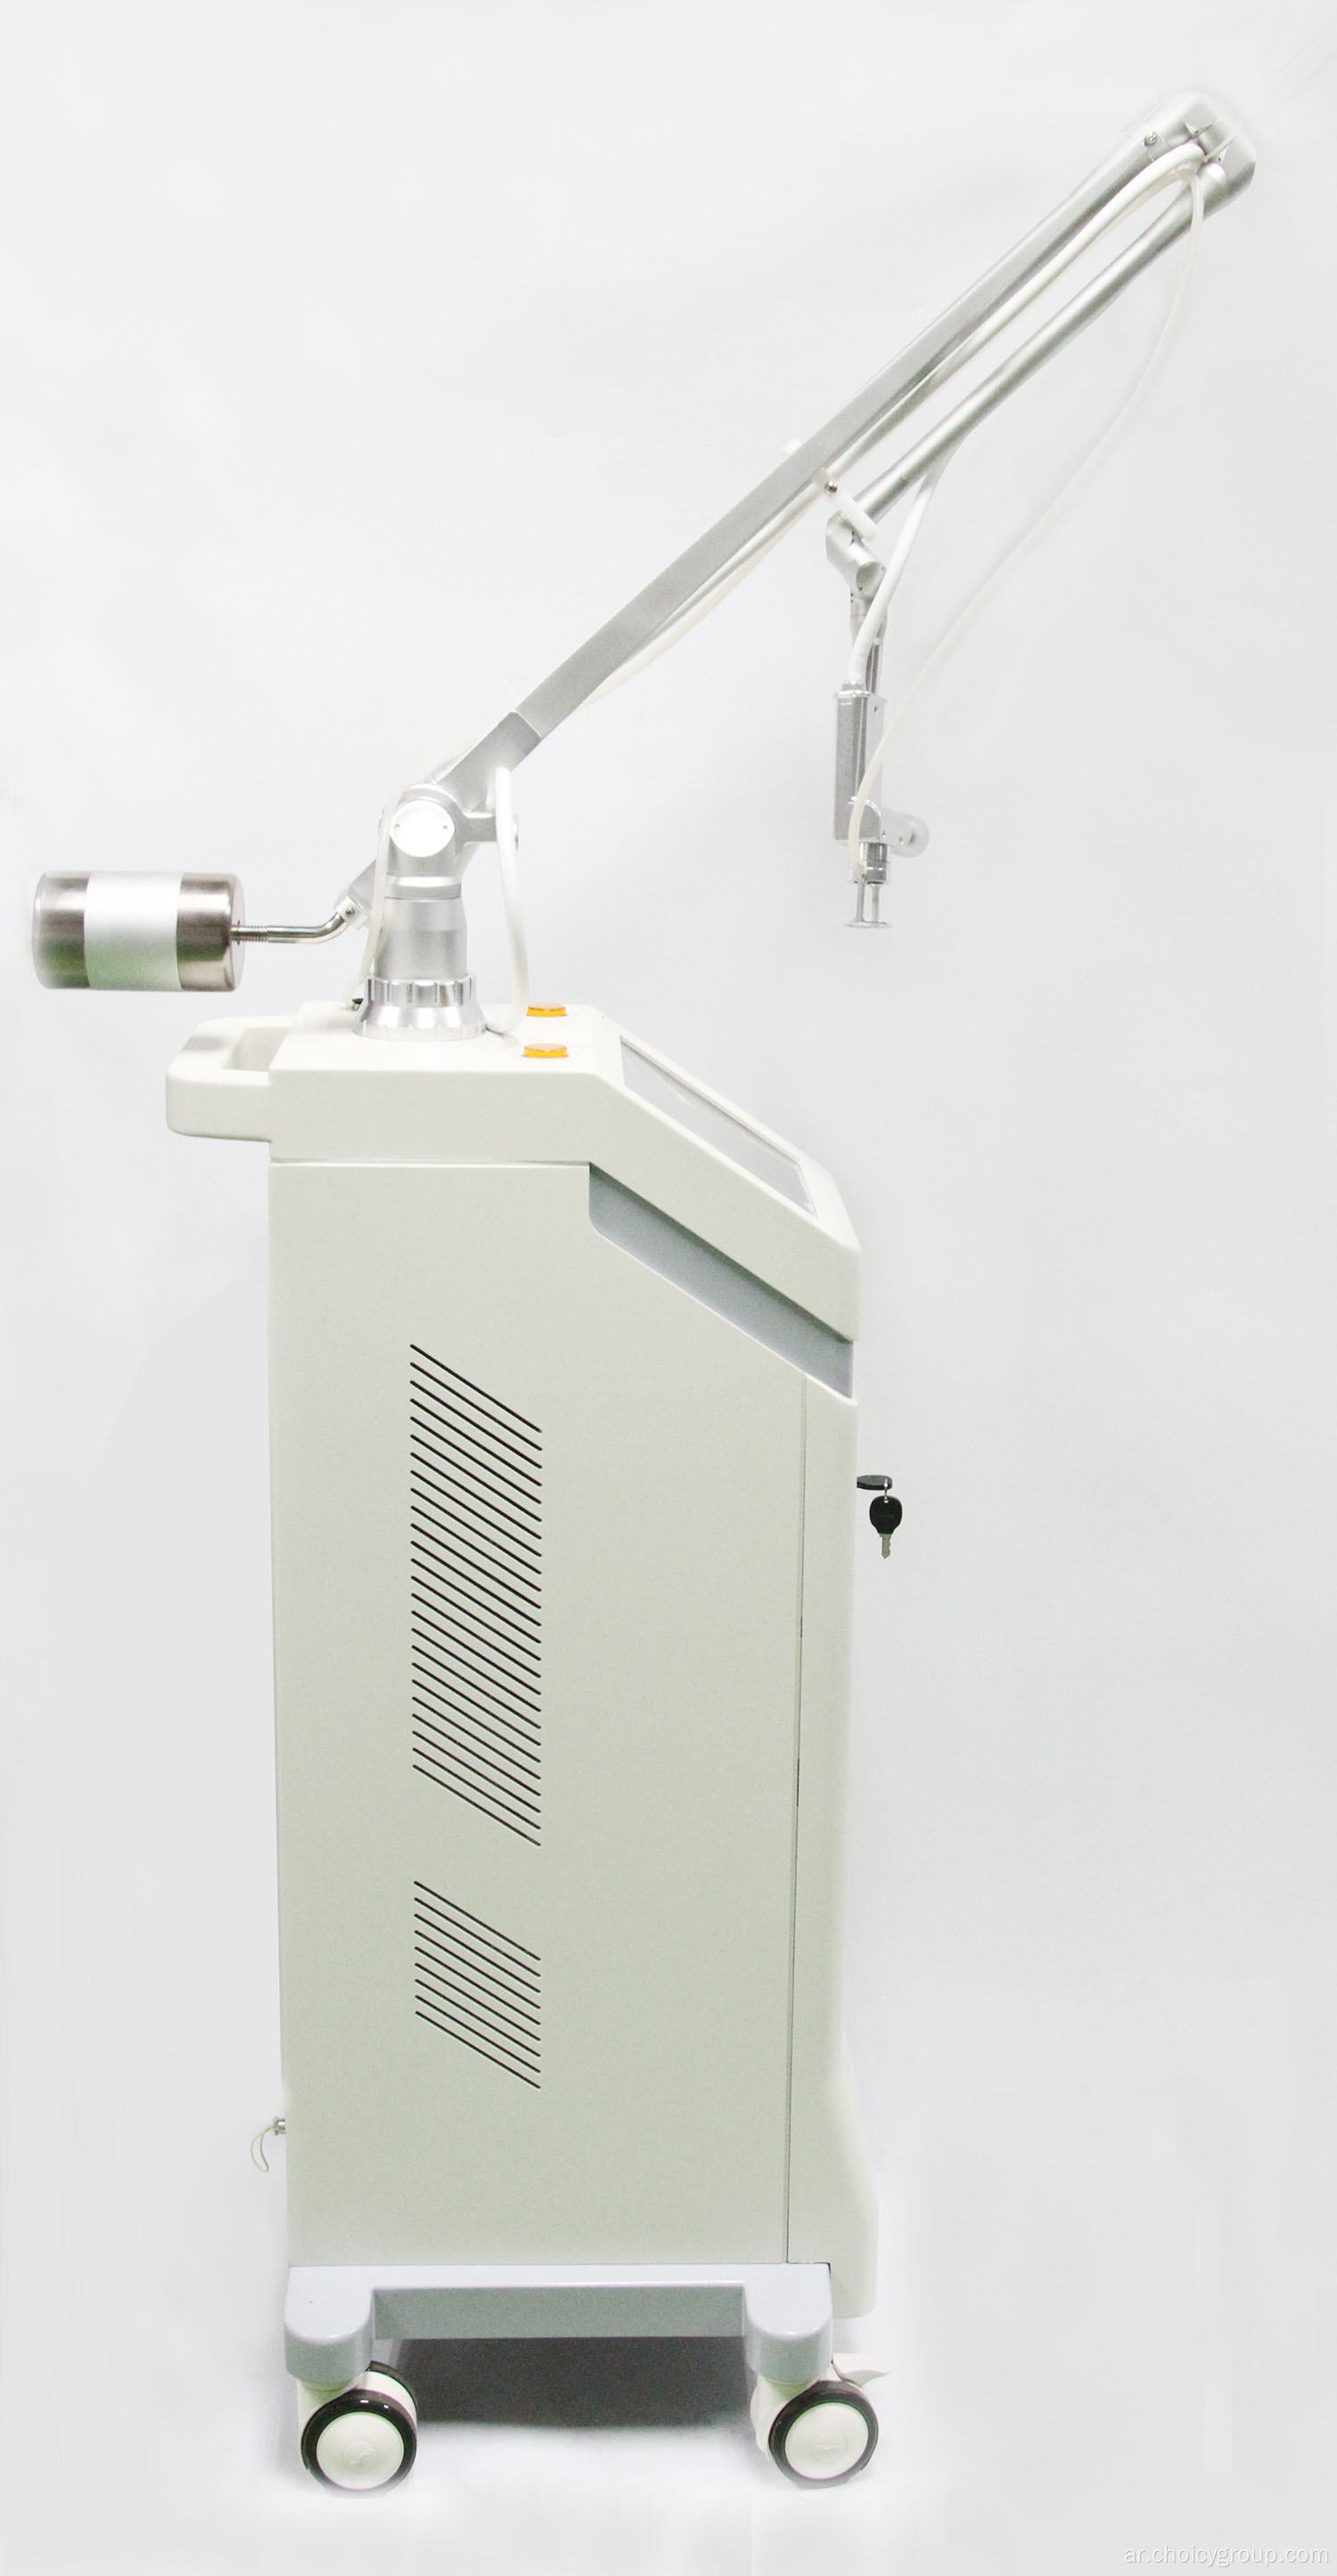 choicy RF CO2 Fractional Laser